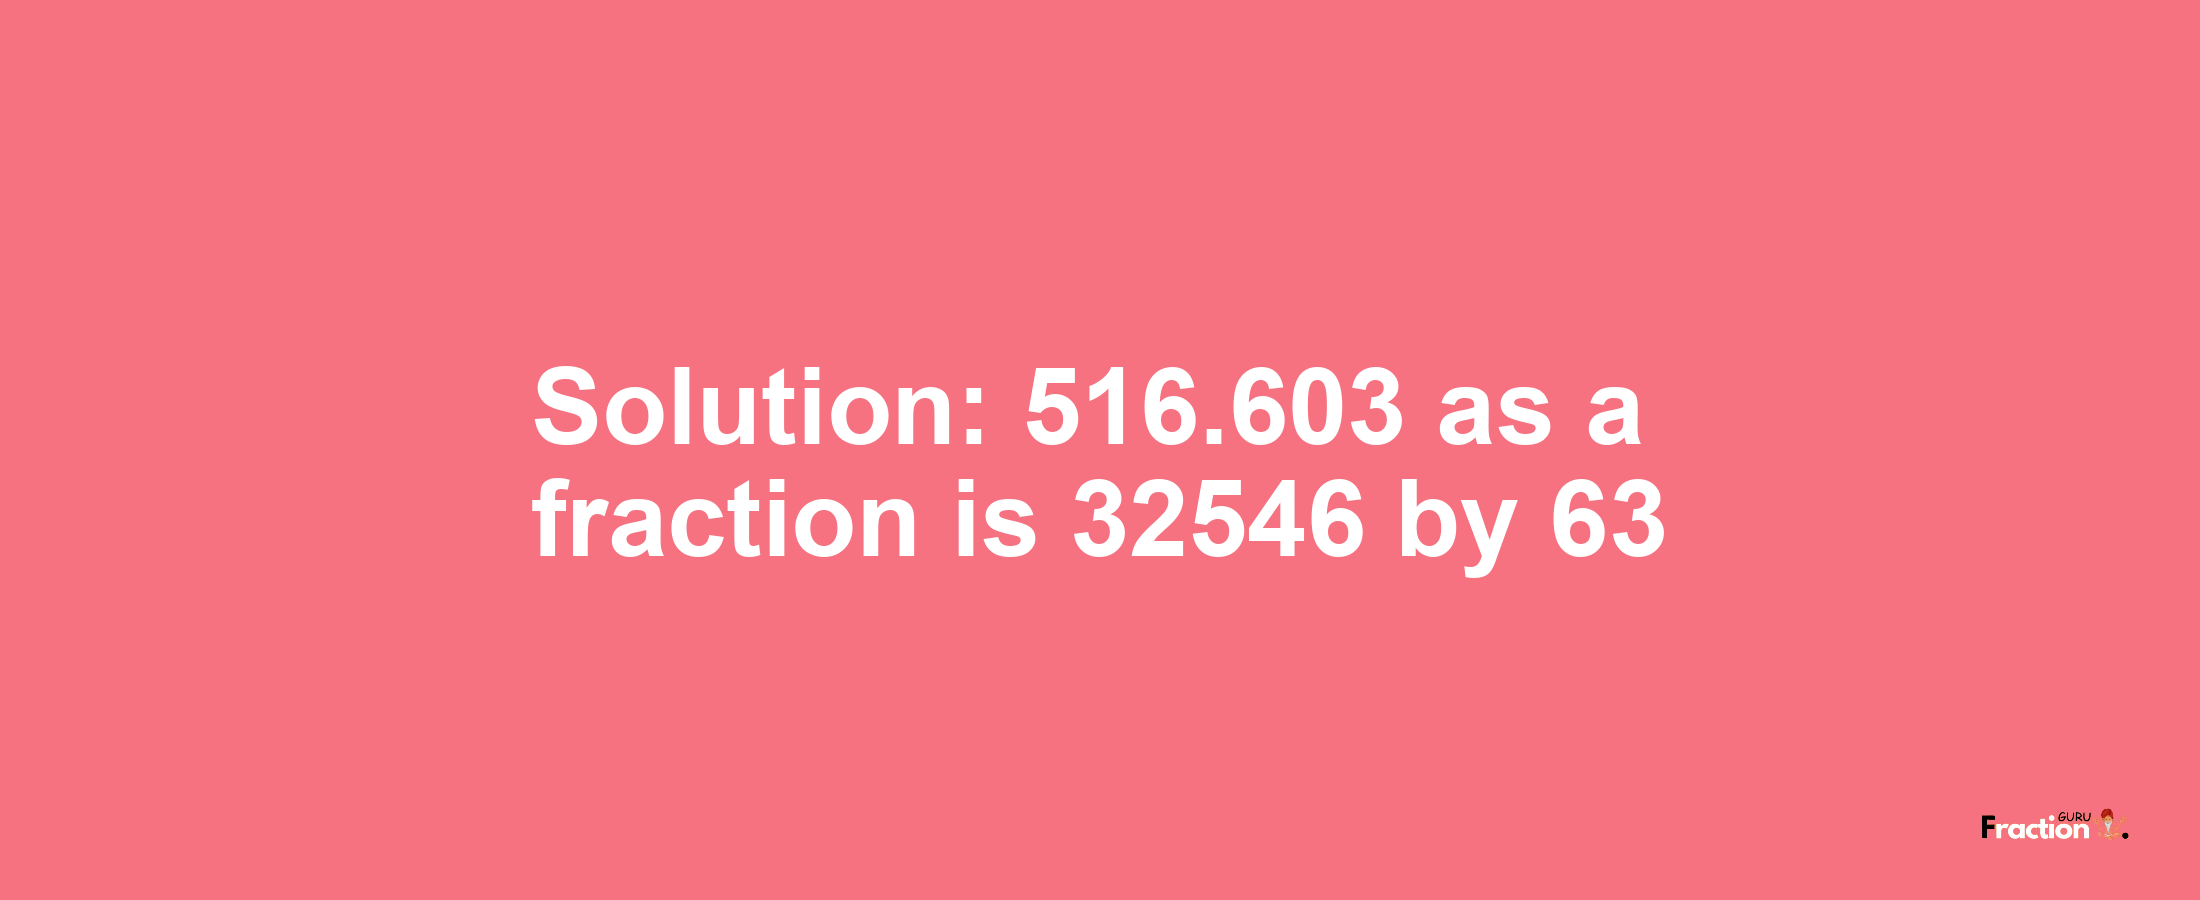 Solution:516.603 as a fraction is 32546/63